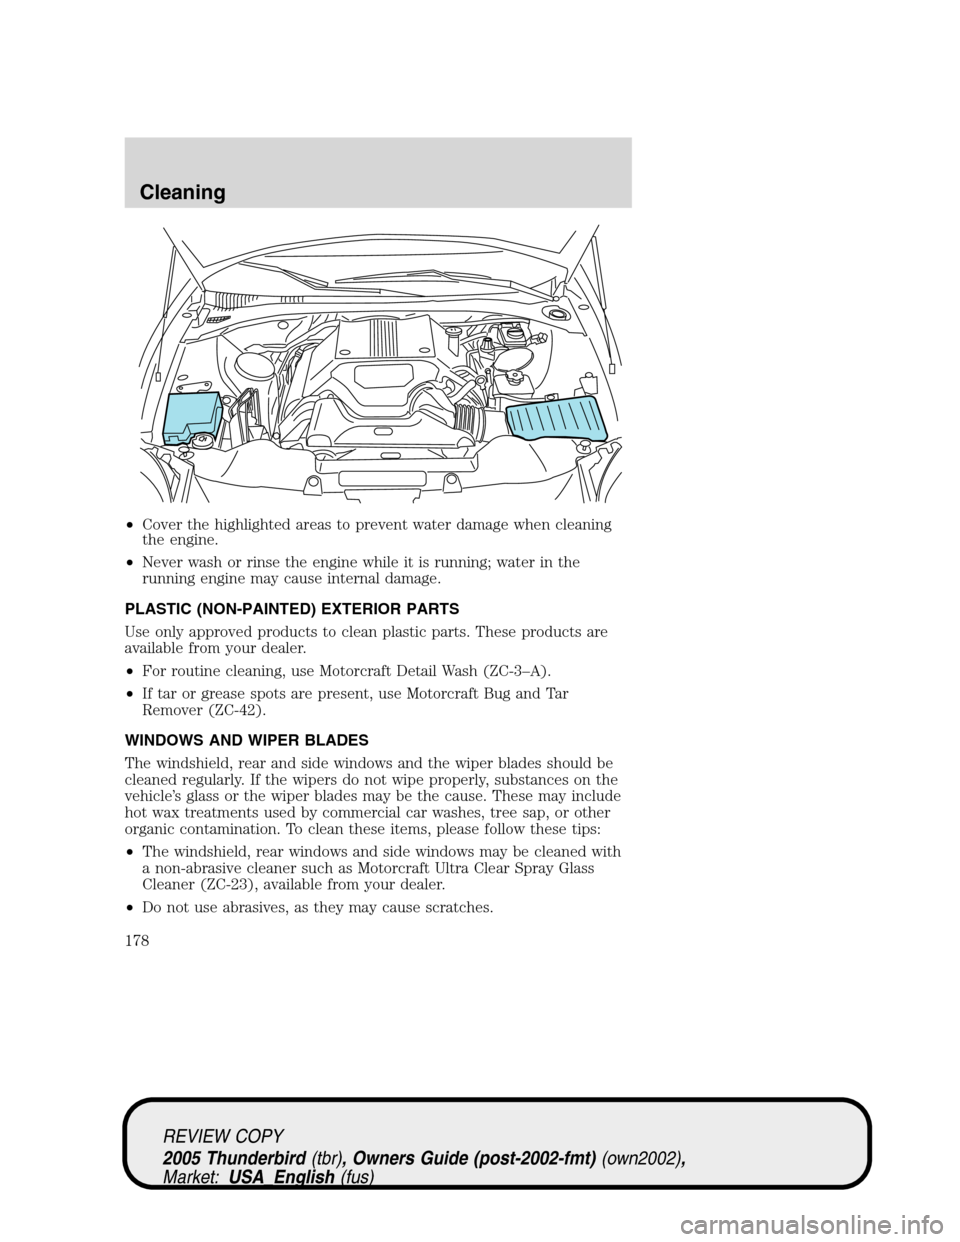 FORD THUNDERBIRD 2005 11.G Owners Manual •Cover the highlighted areas to prevent water damage when cleaning
the engine.
•Never wash or rinse the engine while it is running; water in the
running engine may cause internal damage.
PLASTIC (